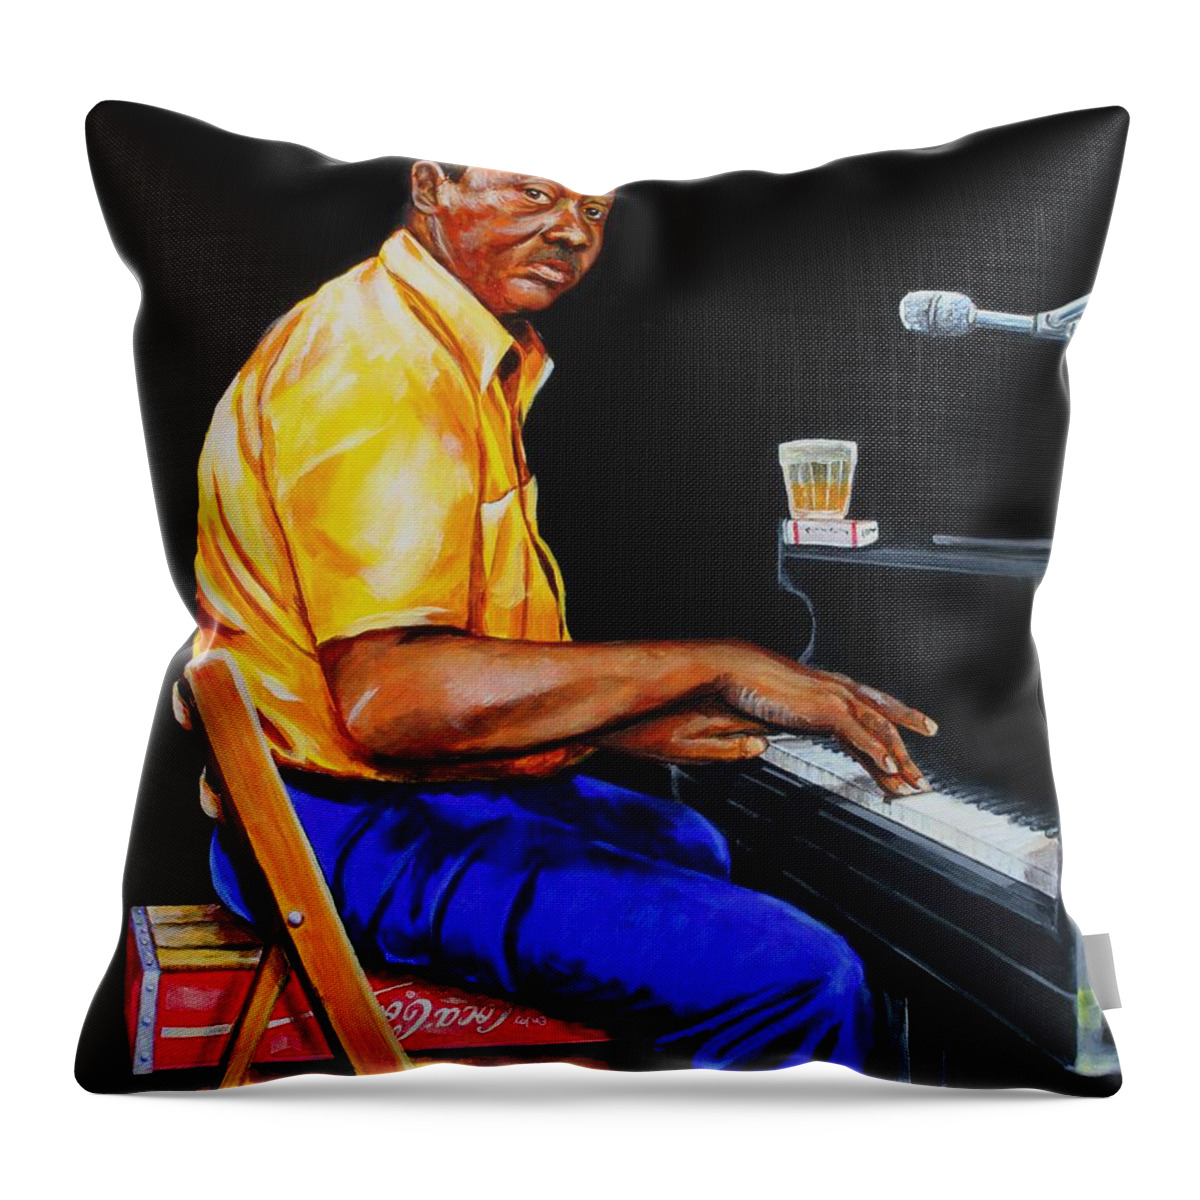 Pinetop Perkins Throw Pillow featuring the painting Pinetop Perkins by Karl Wagner